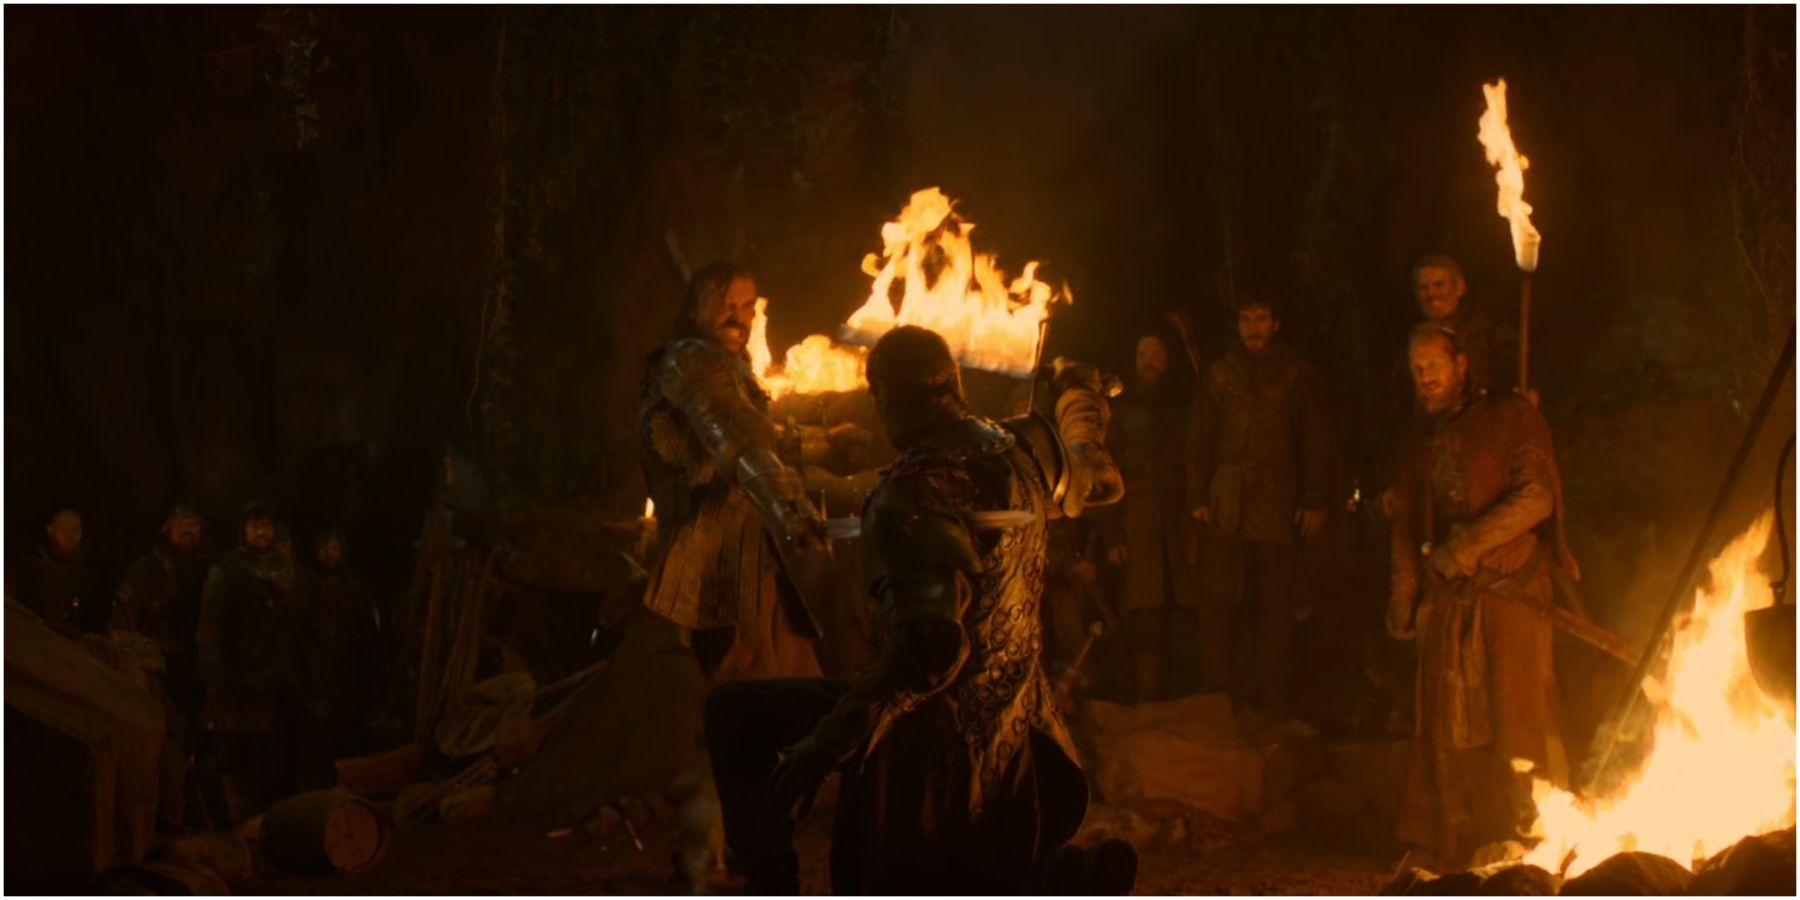 Beric Dondarrion is mortally wounded by Sandor Clegane in Game of Thrones.